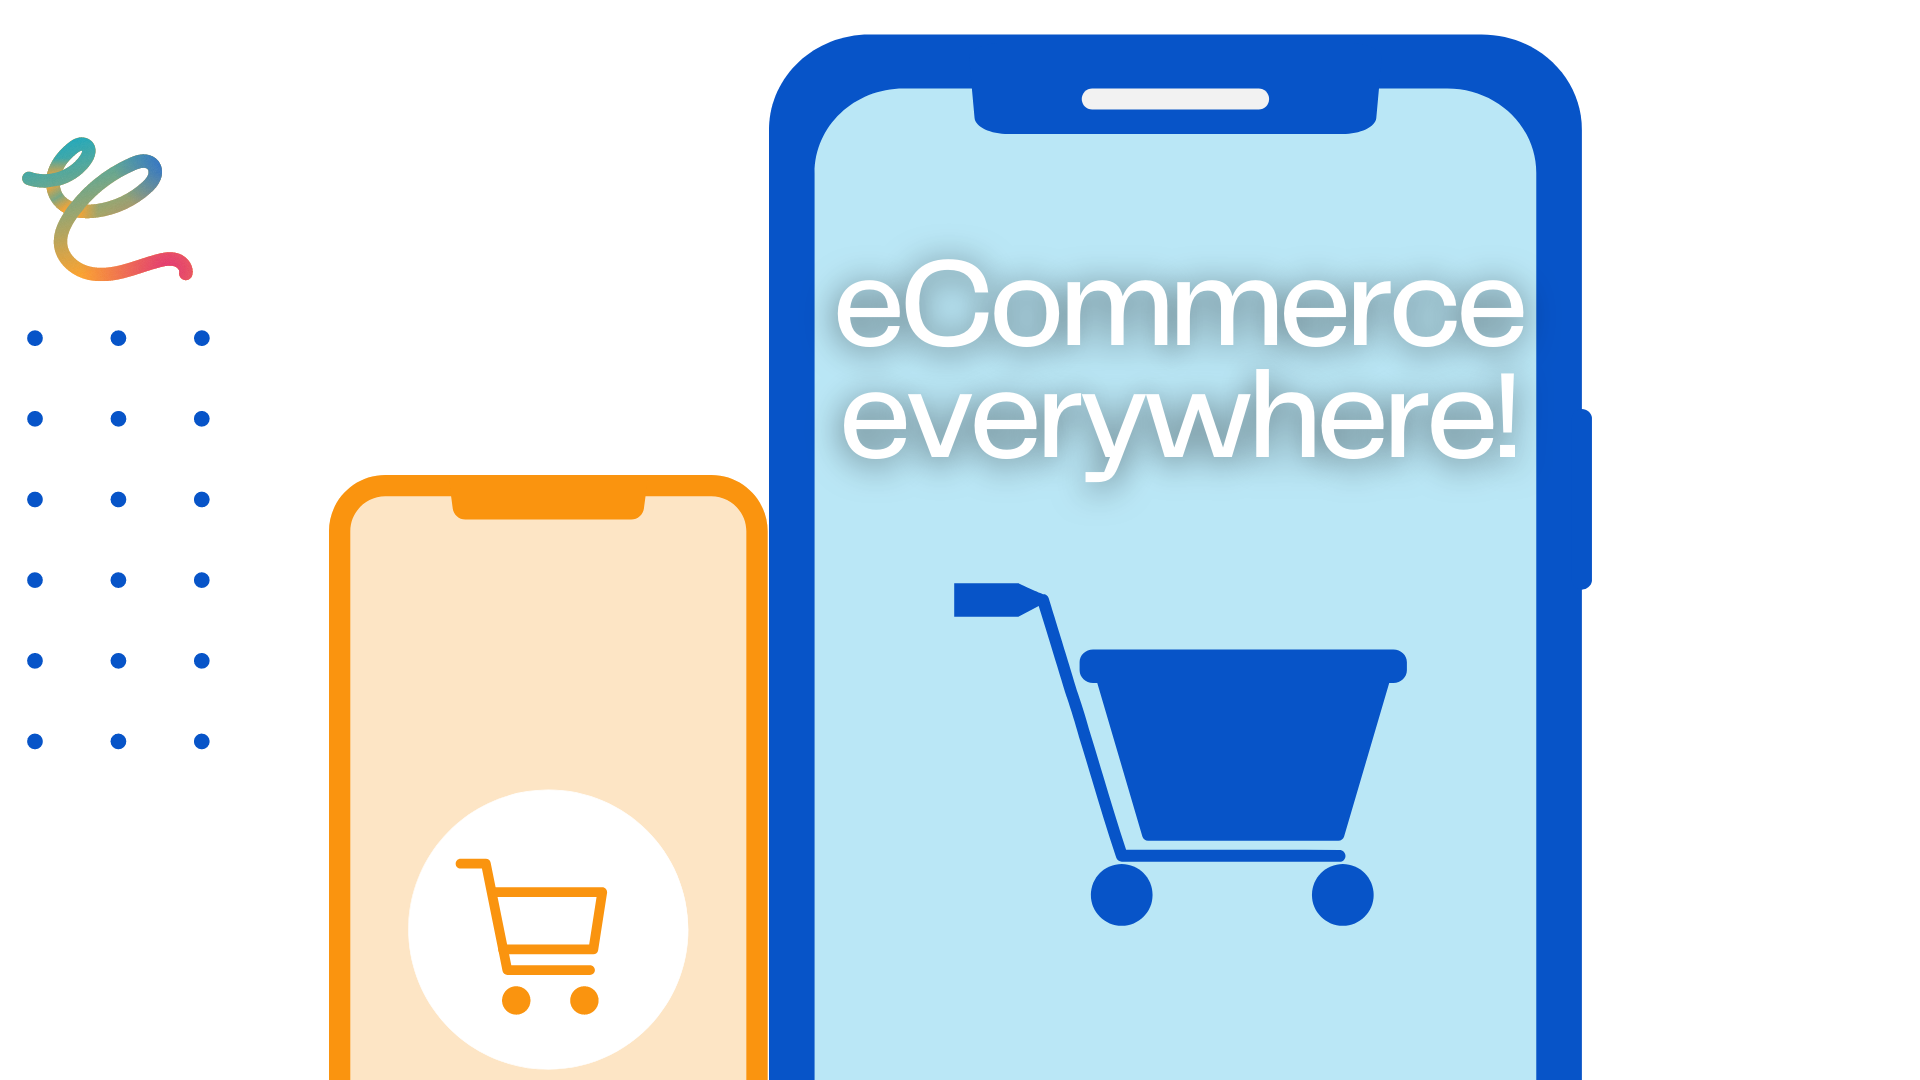 simply the best digital "ecommerce everywhere" graphic featuring a blue and orange mobile phone with shopping carts